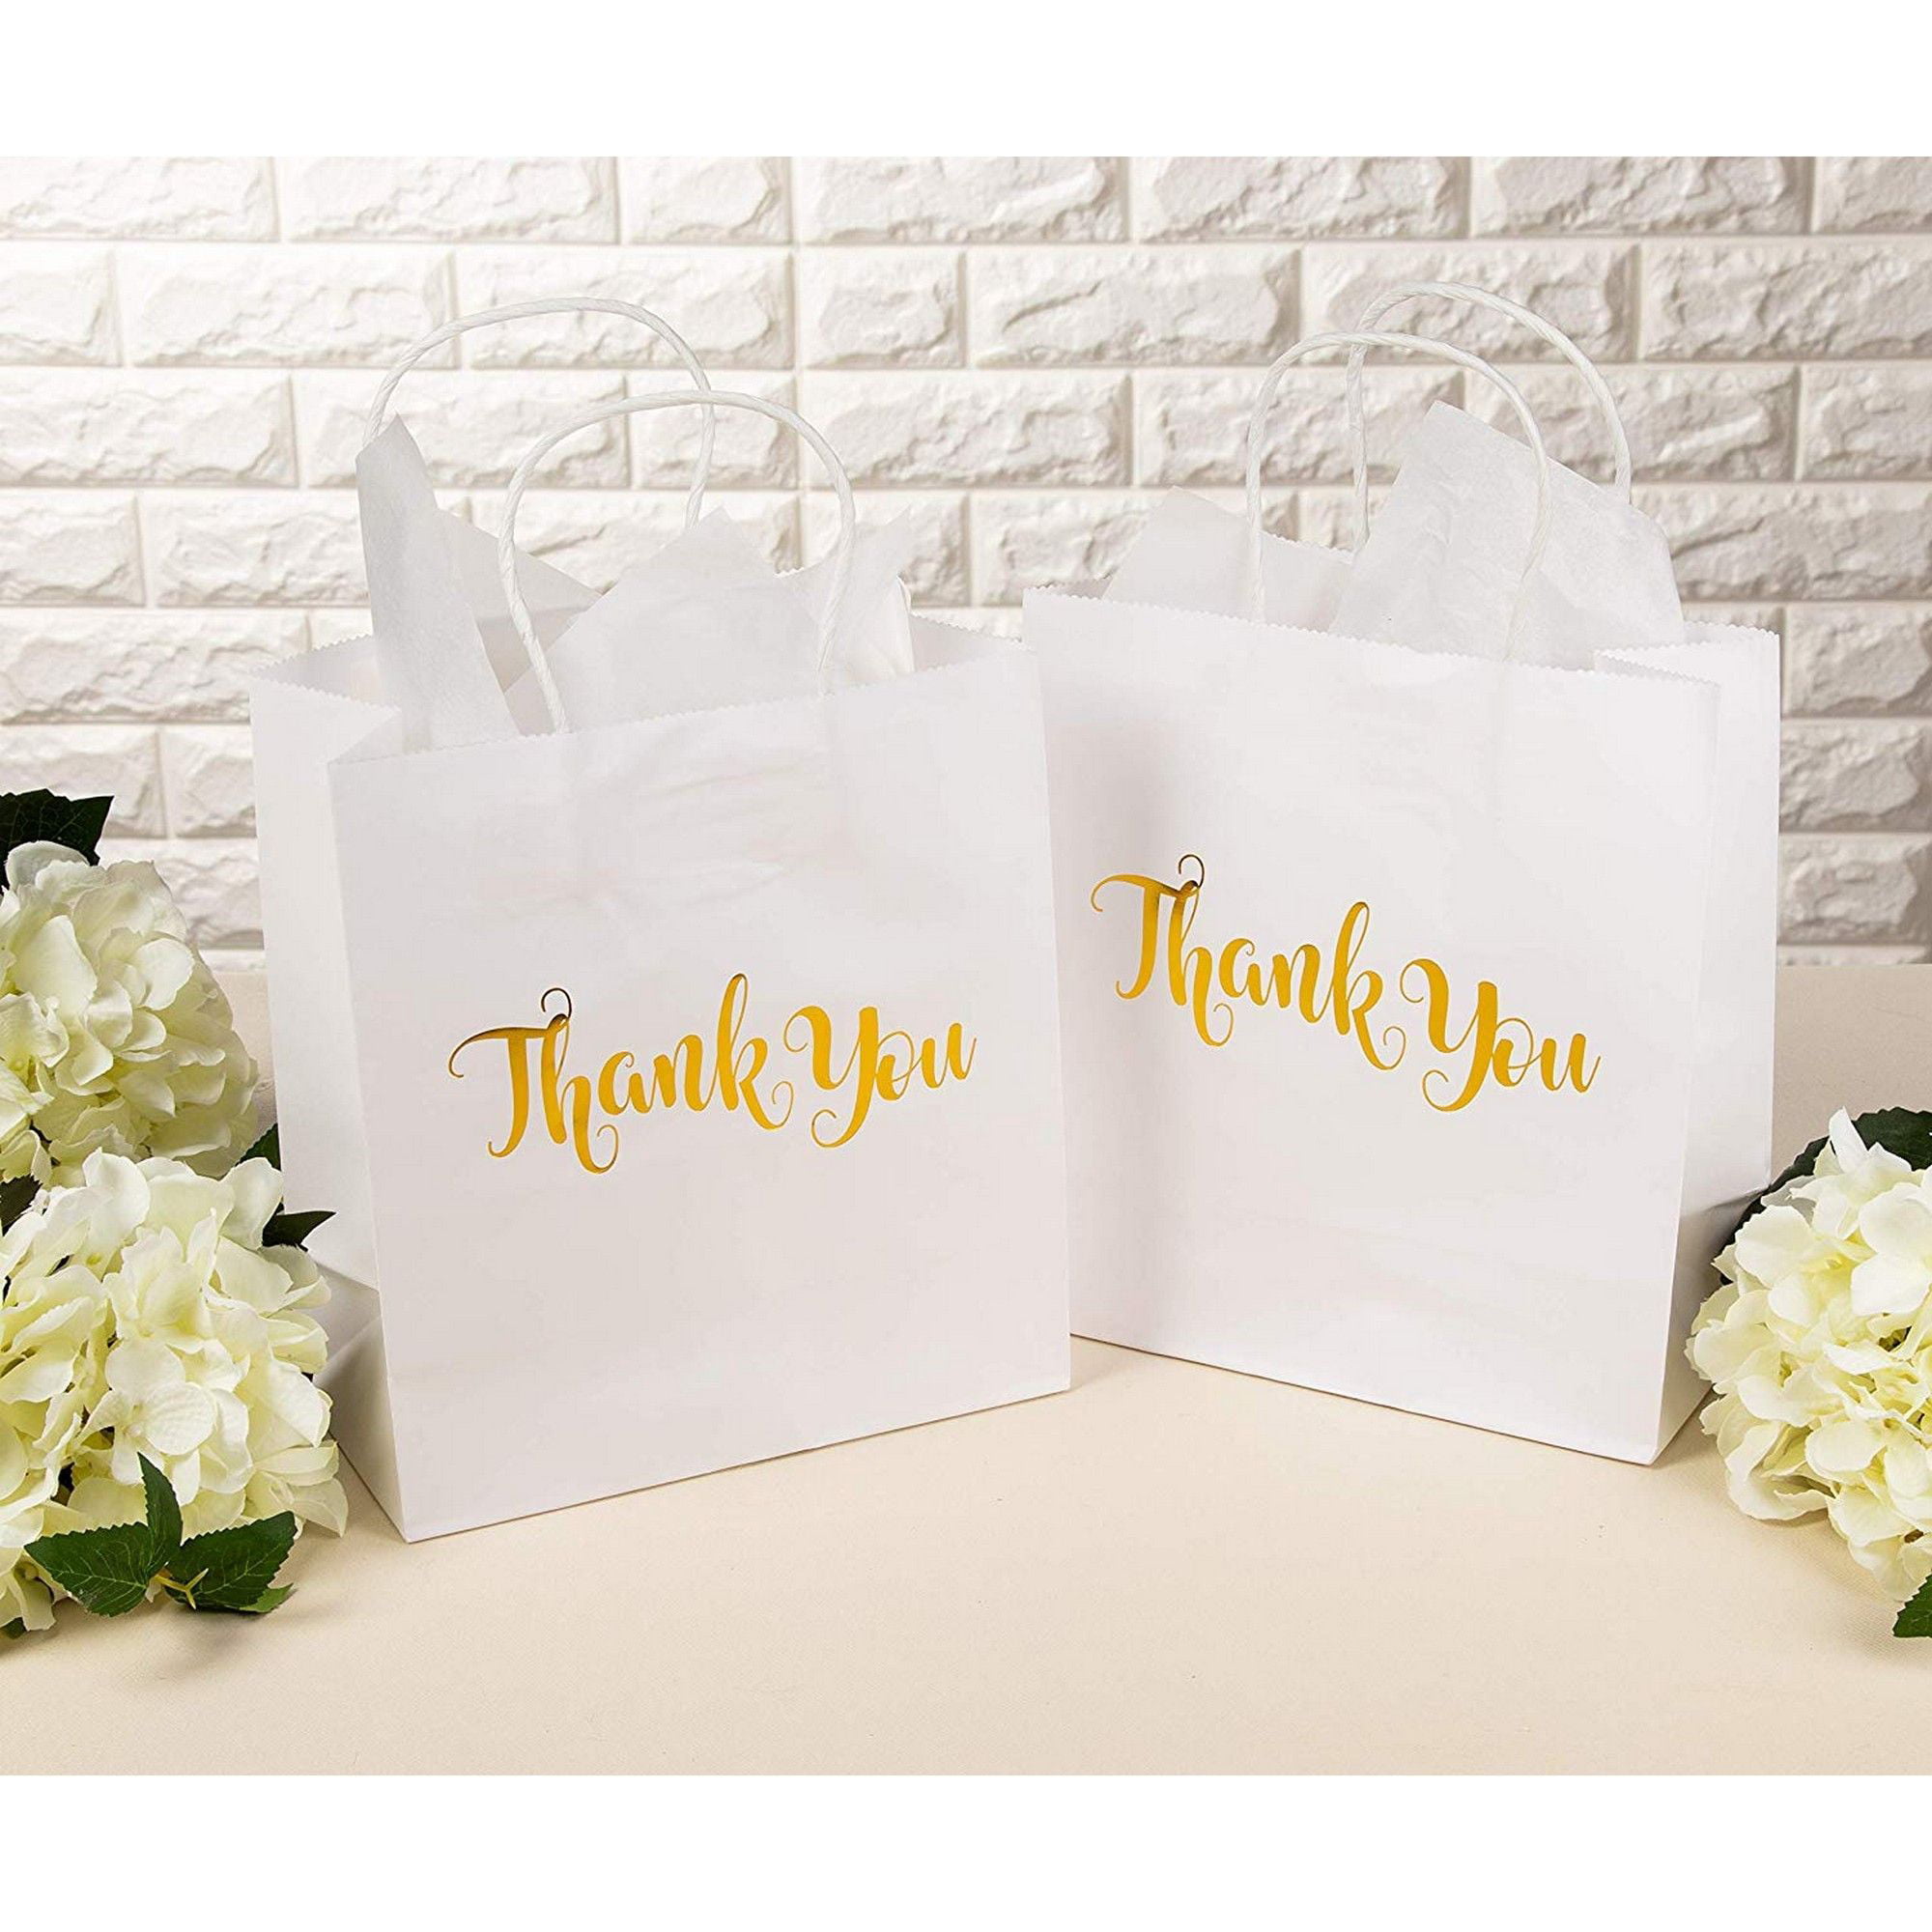 Elegant Paper Gift Bags with ‘’Thank You’’ Embossed in Rose Gold Foil Letters 12 Pack Thank You Gift Bags White Wedding Party Perfect for Birthday Party Paper Favor Bags 4x 7x 9 Inches